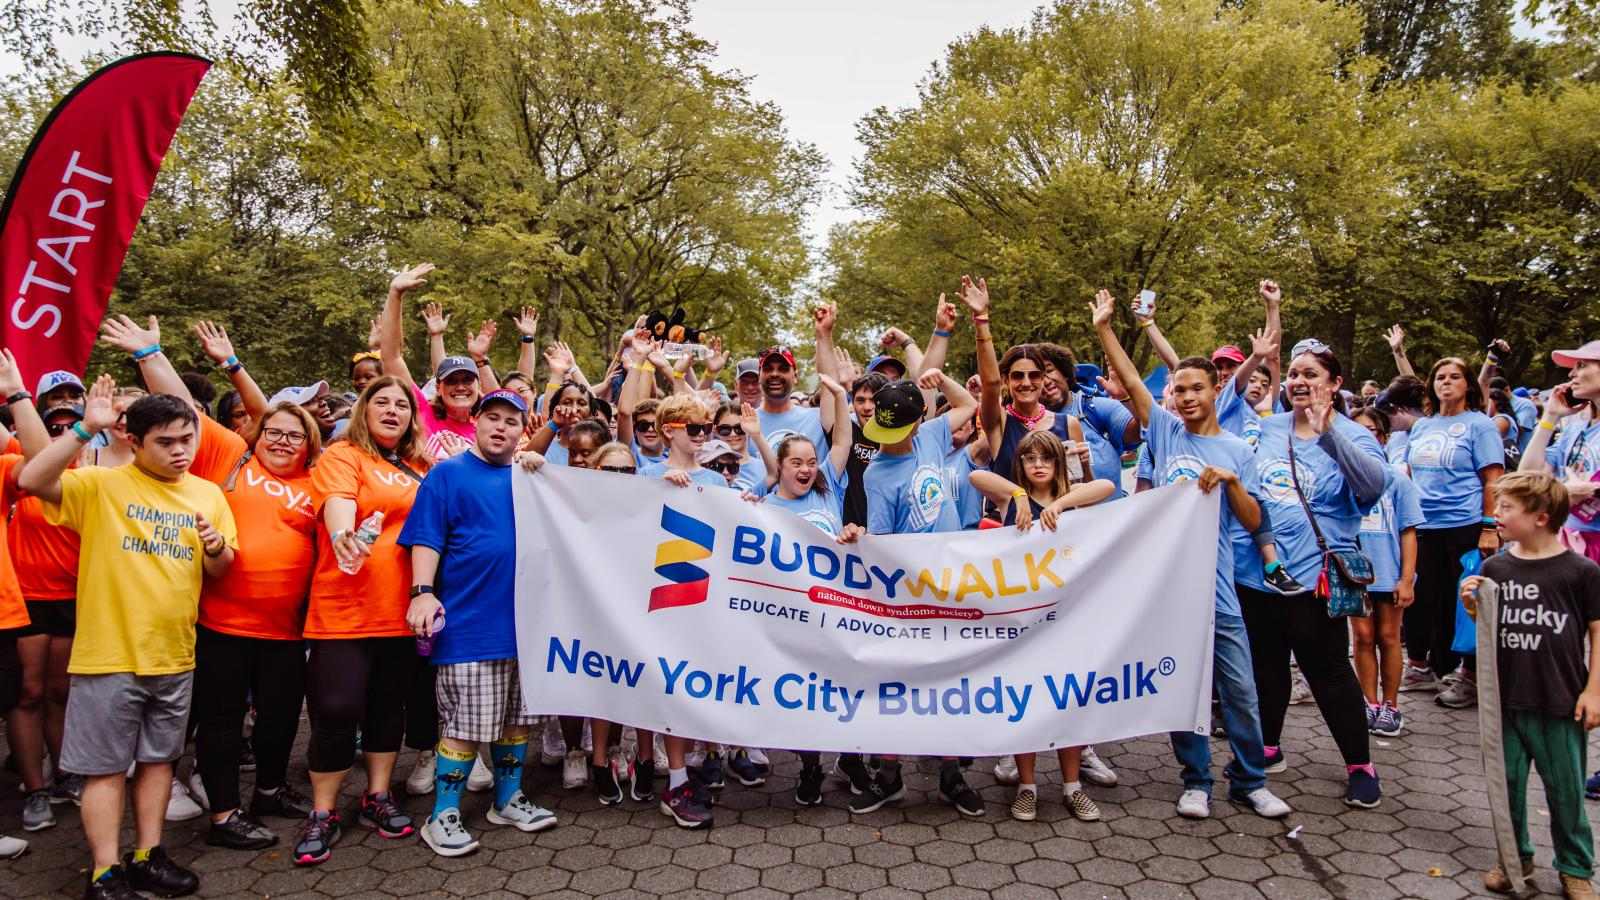 9-intriguing-facts-about-buddy-walk